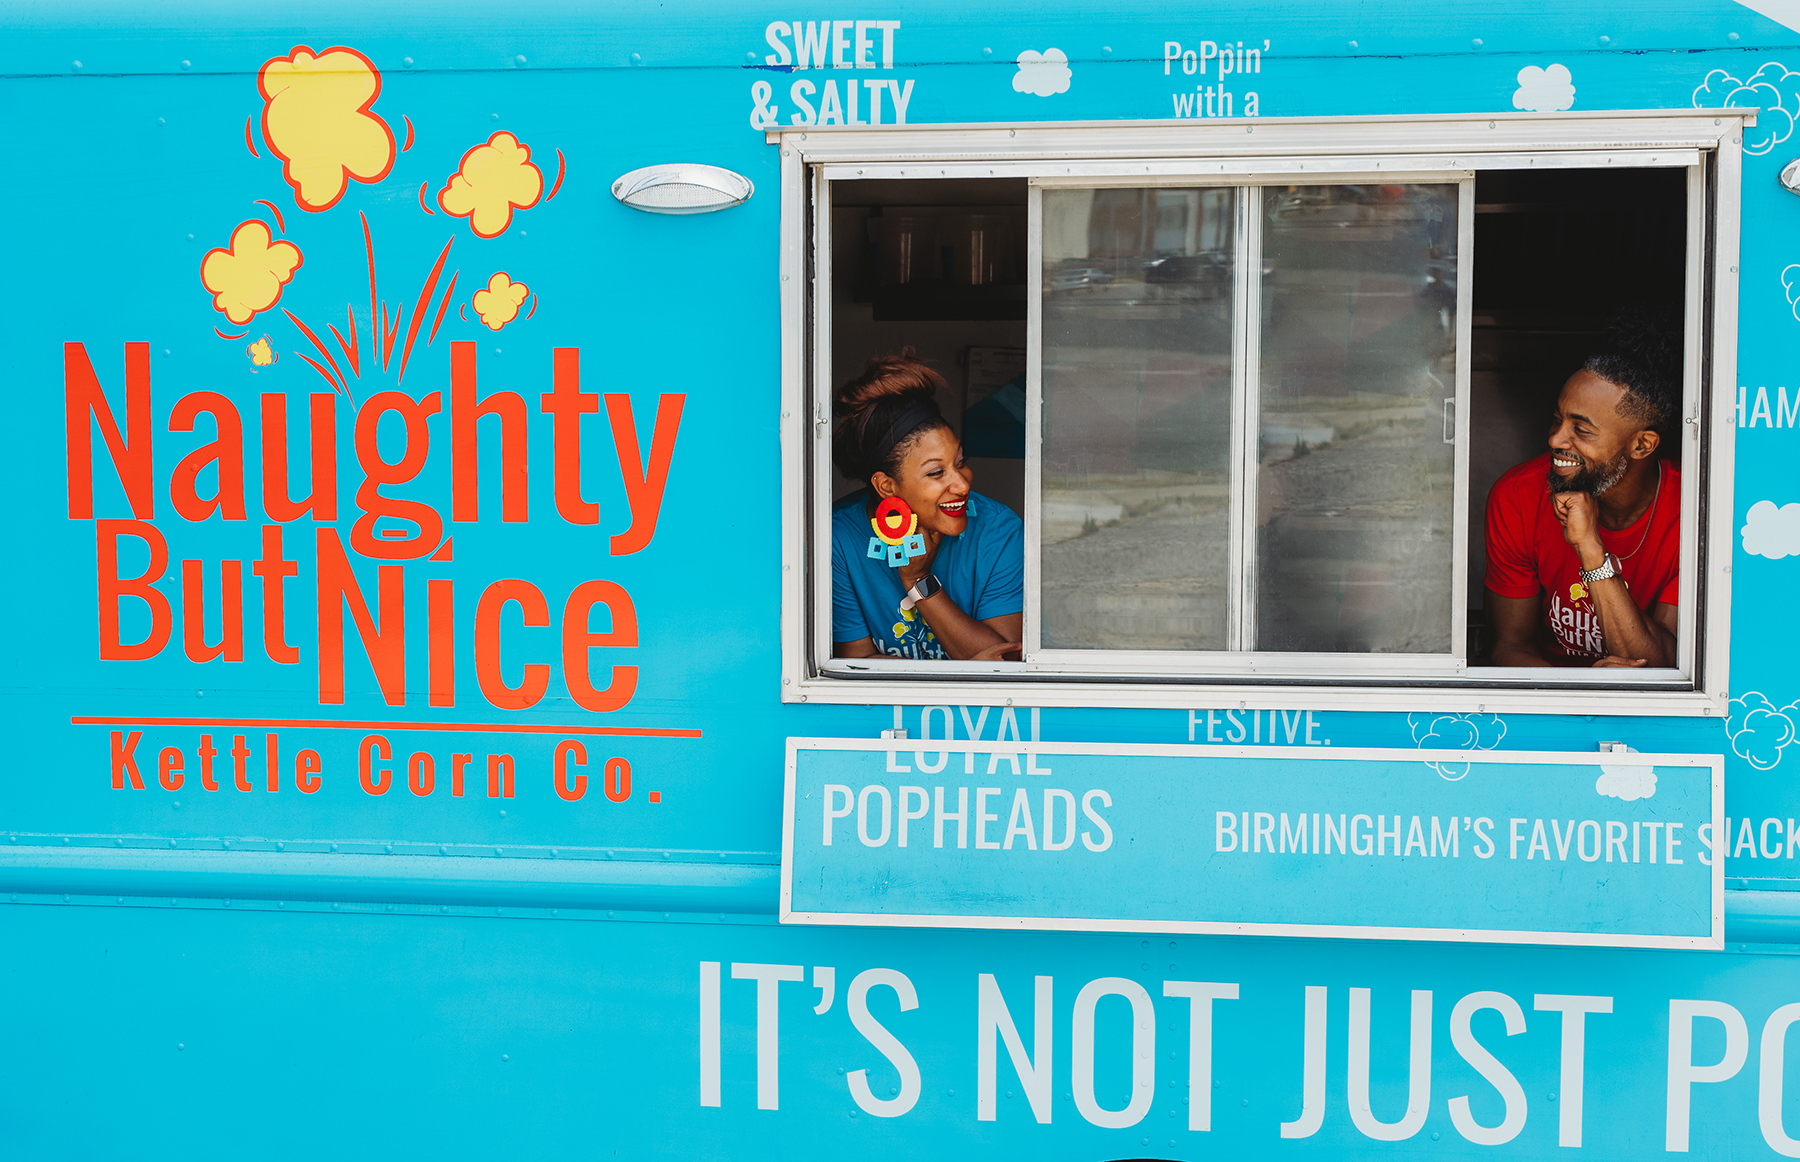 Tanesha and Clem Summers in the Naughty But Nice Kettle Corn Co. truck.